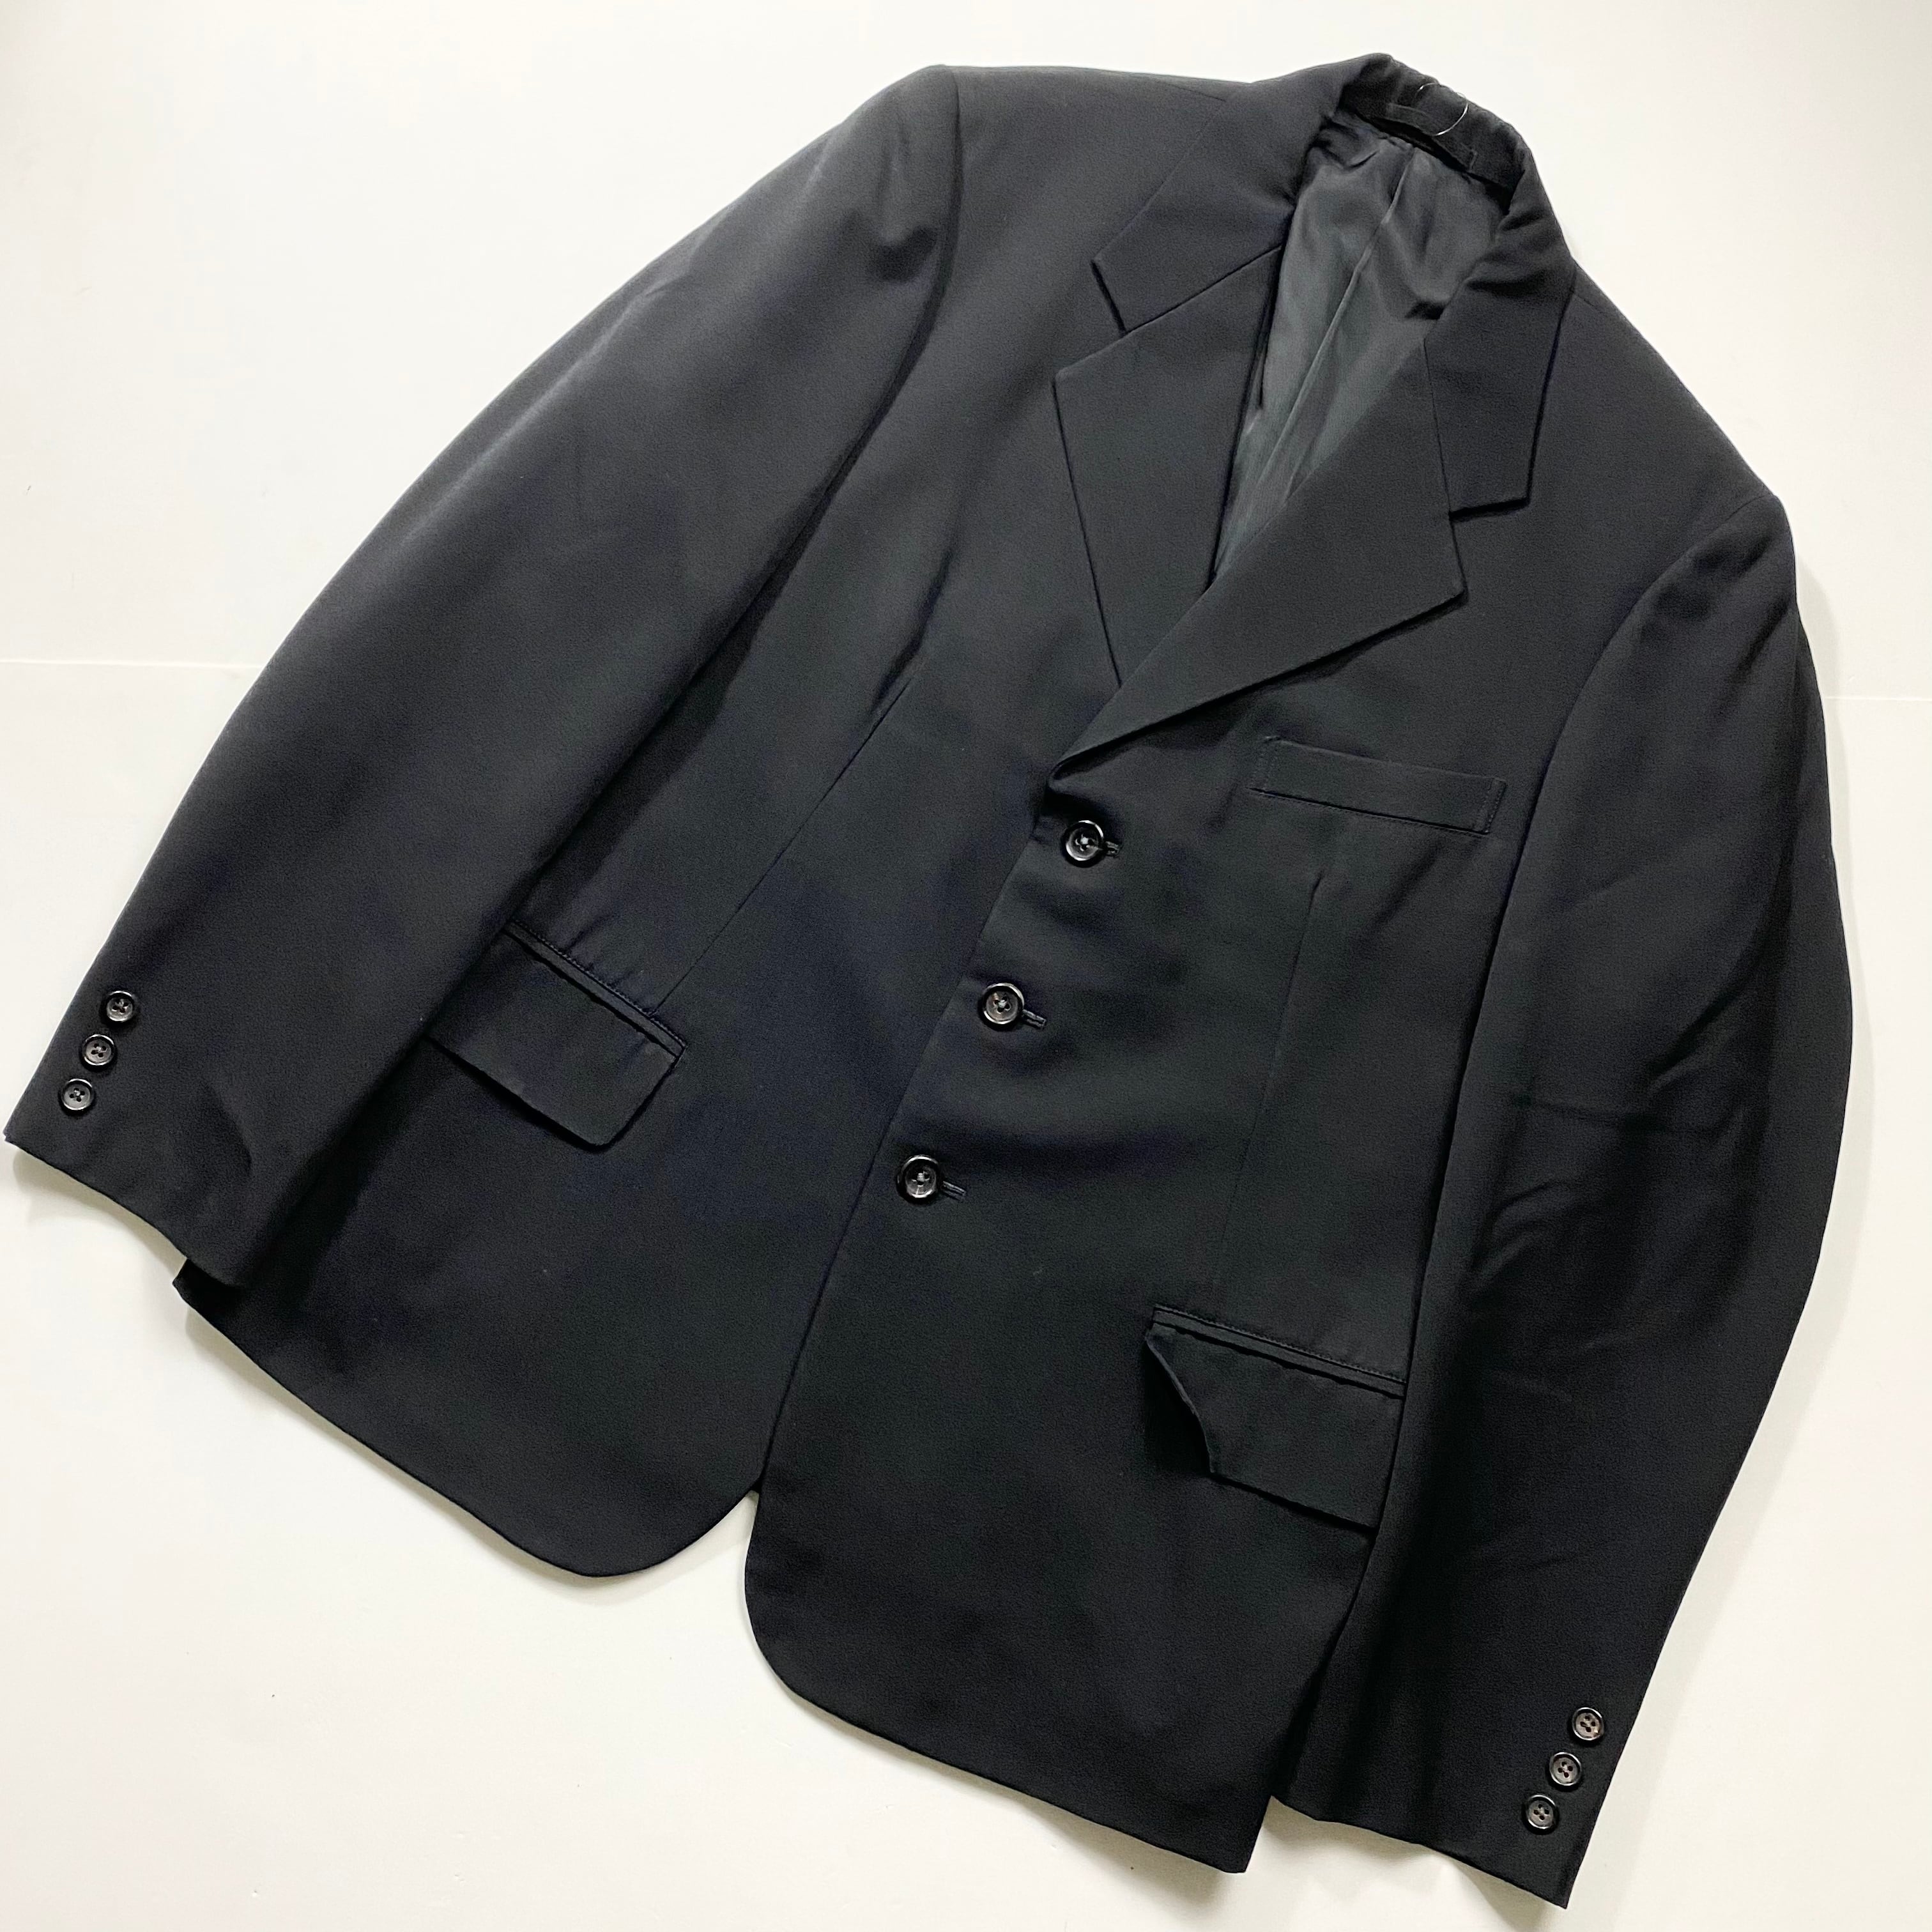 Y’s FOR MEN “RED LABEL” tailored jacket | NOIR ONLINE powered by BASE